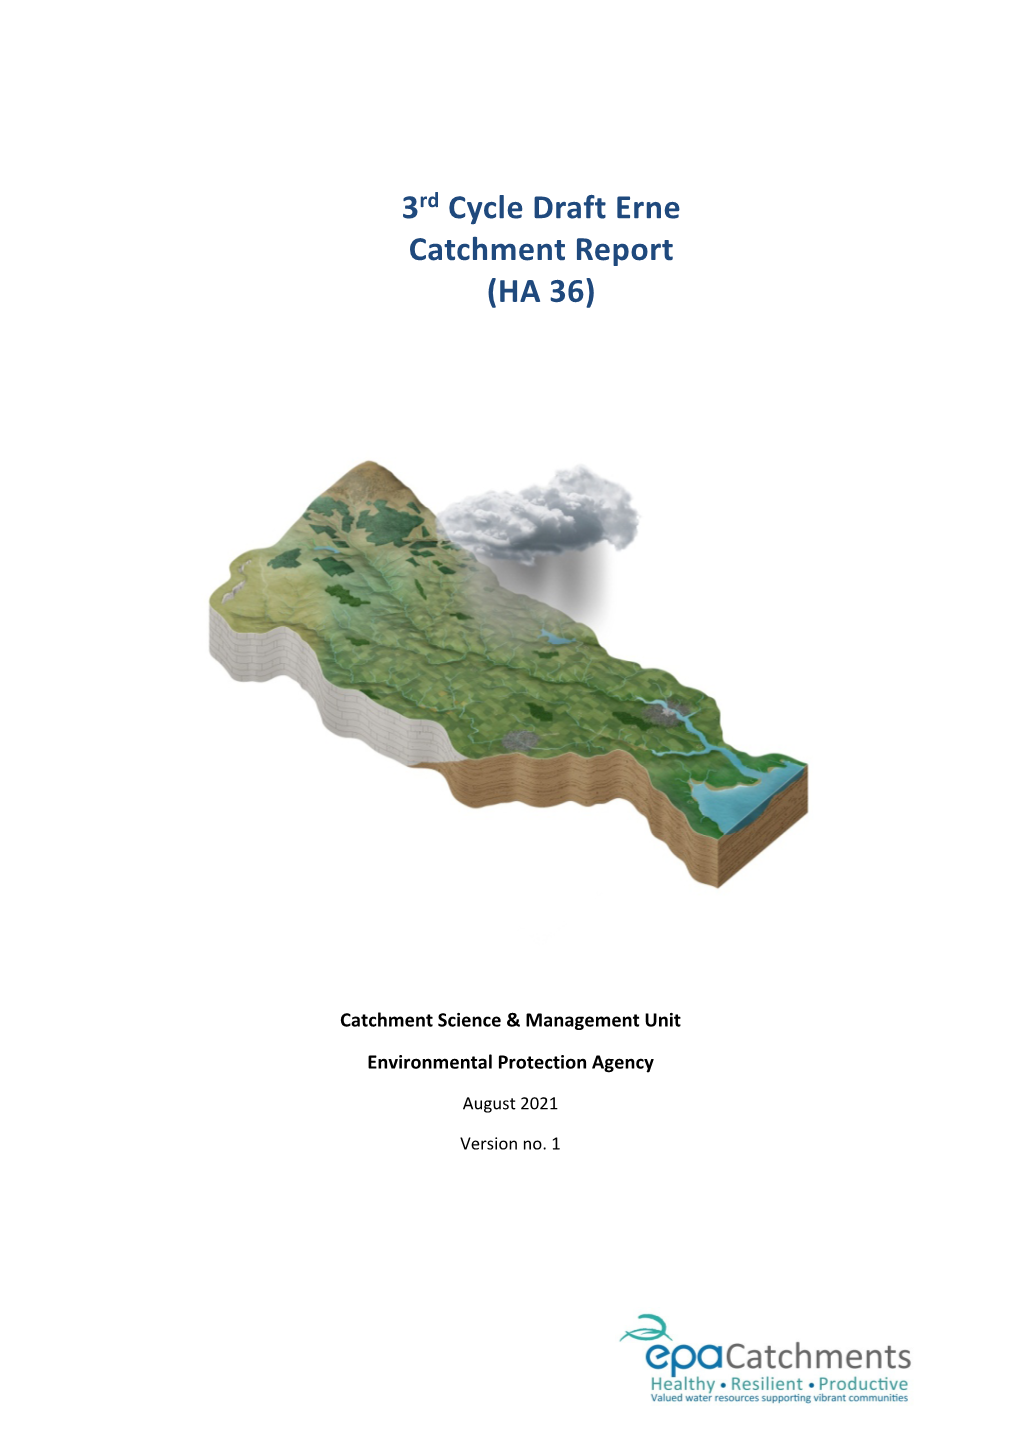 3Rd Cycle Draft Erne Catchment Report (HA 36)